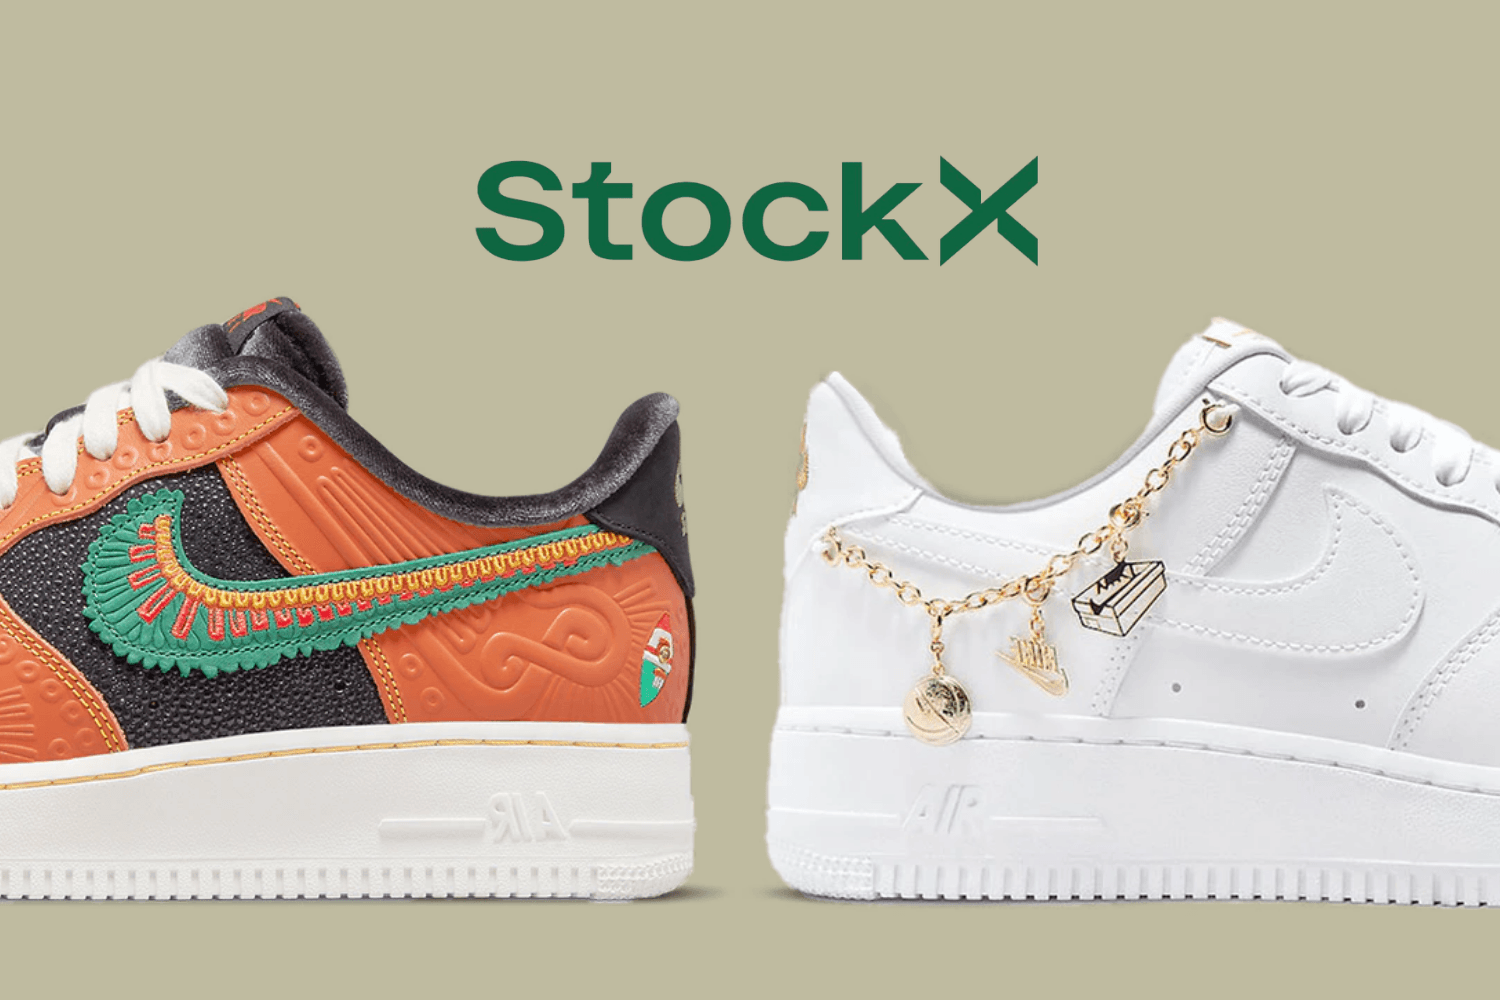 The 10 Most Popular Nike Air Force 1s at StockX